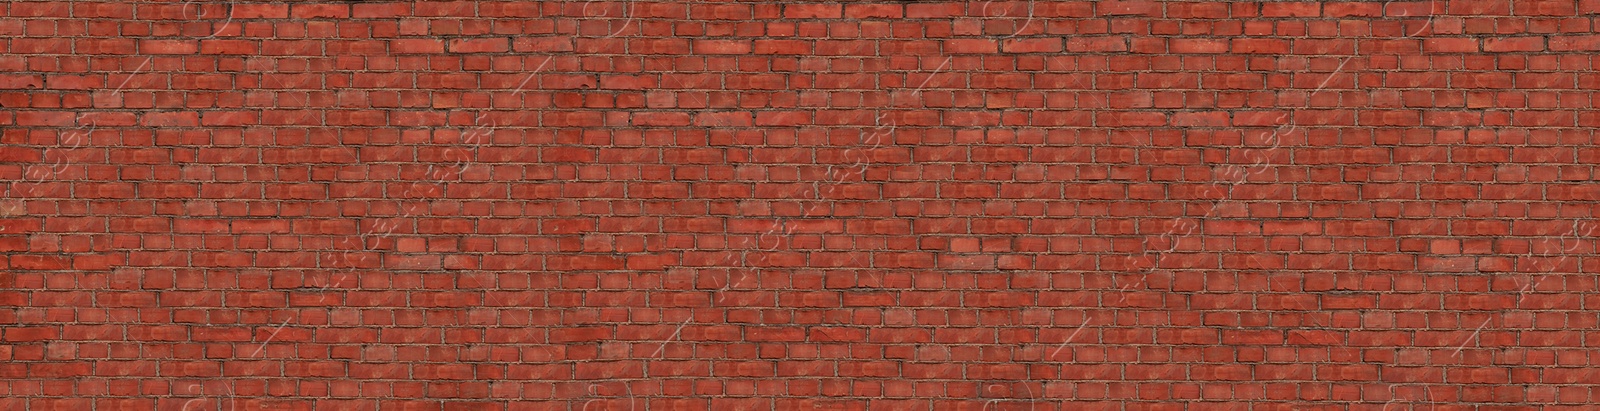 Image of Texture of red brick wall as background. Banner design